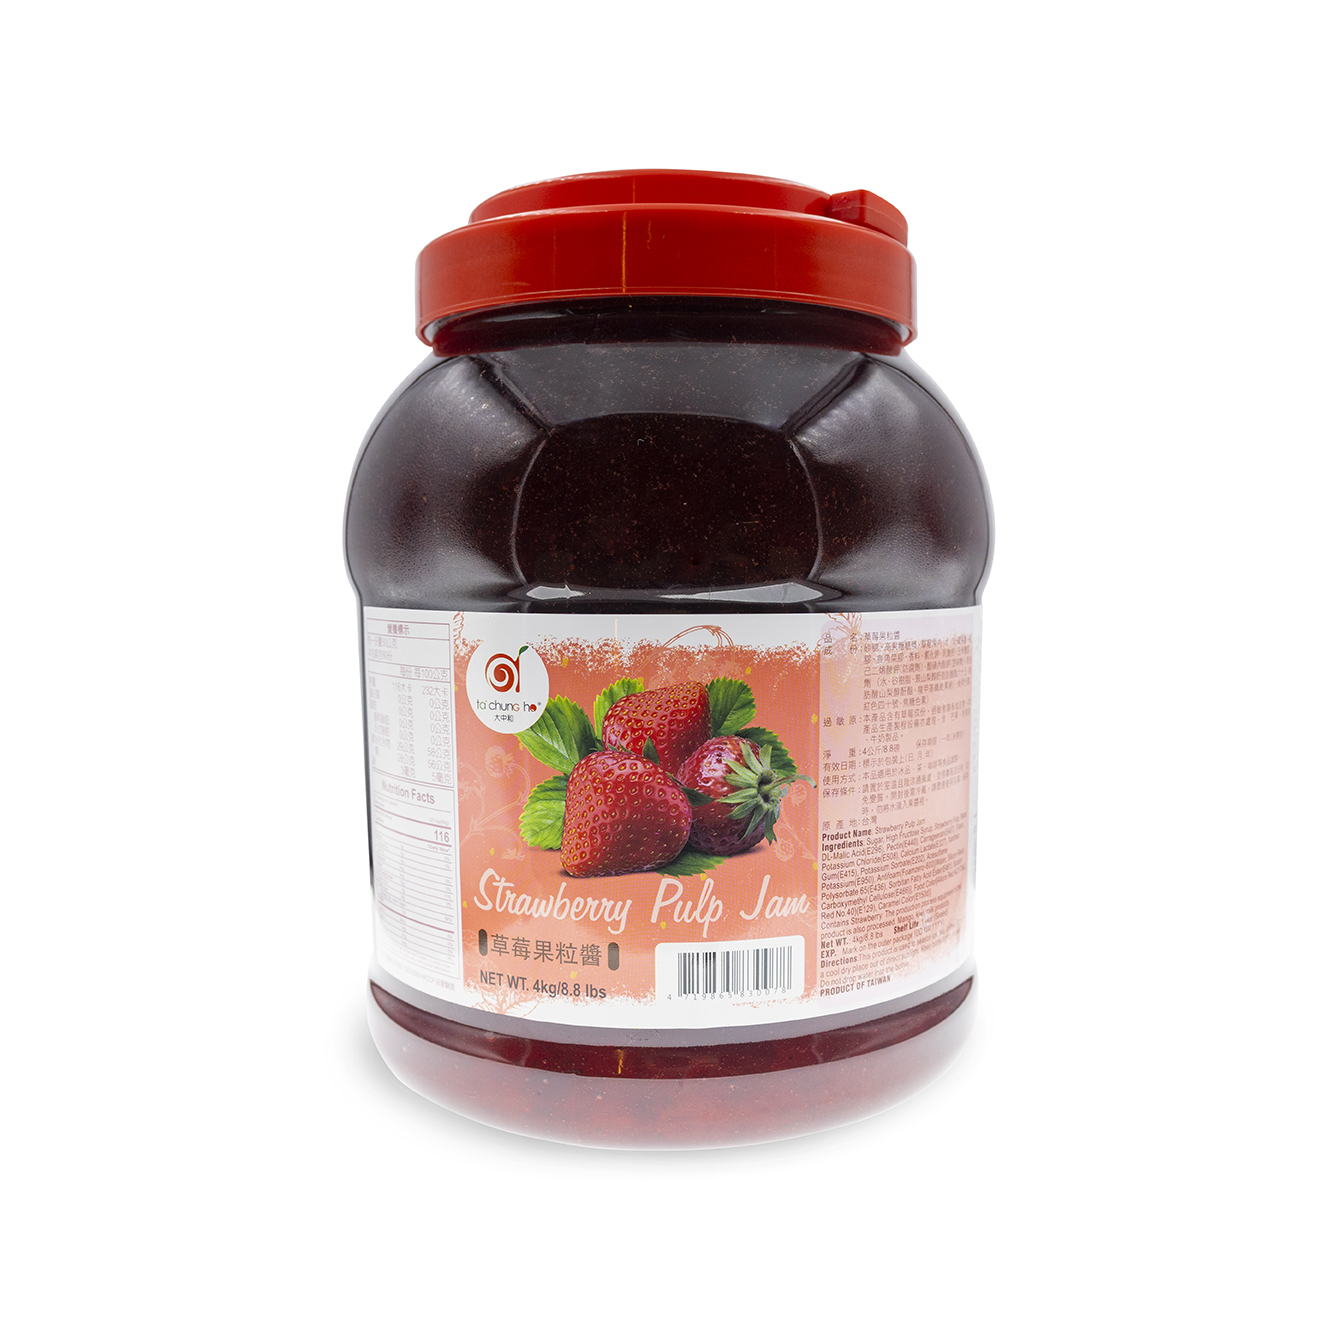 Strawberry Pulp Jam Package